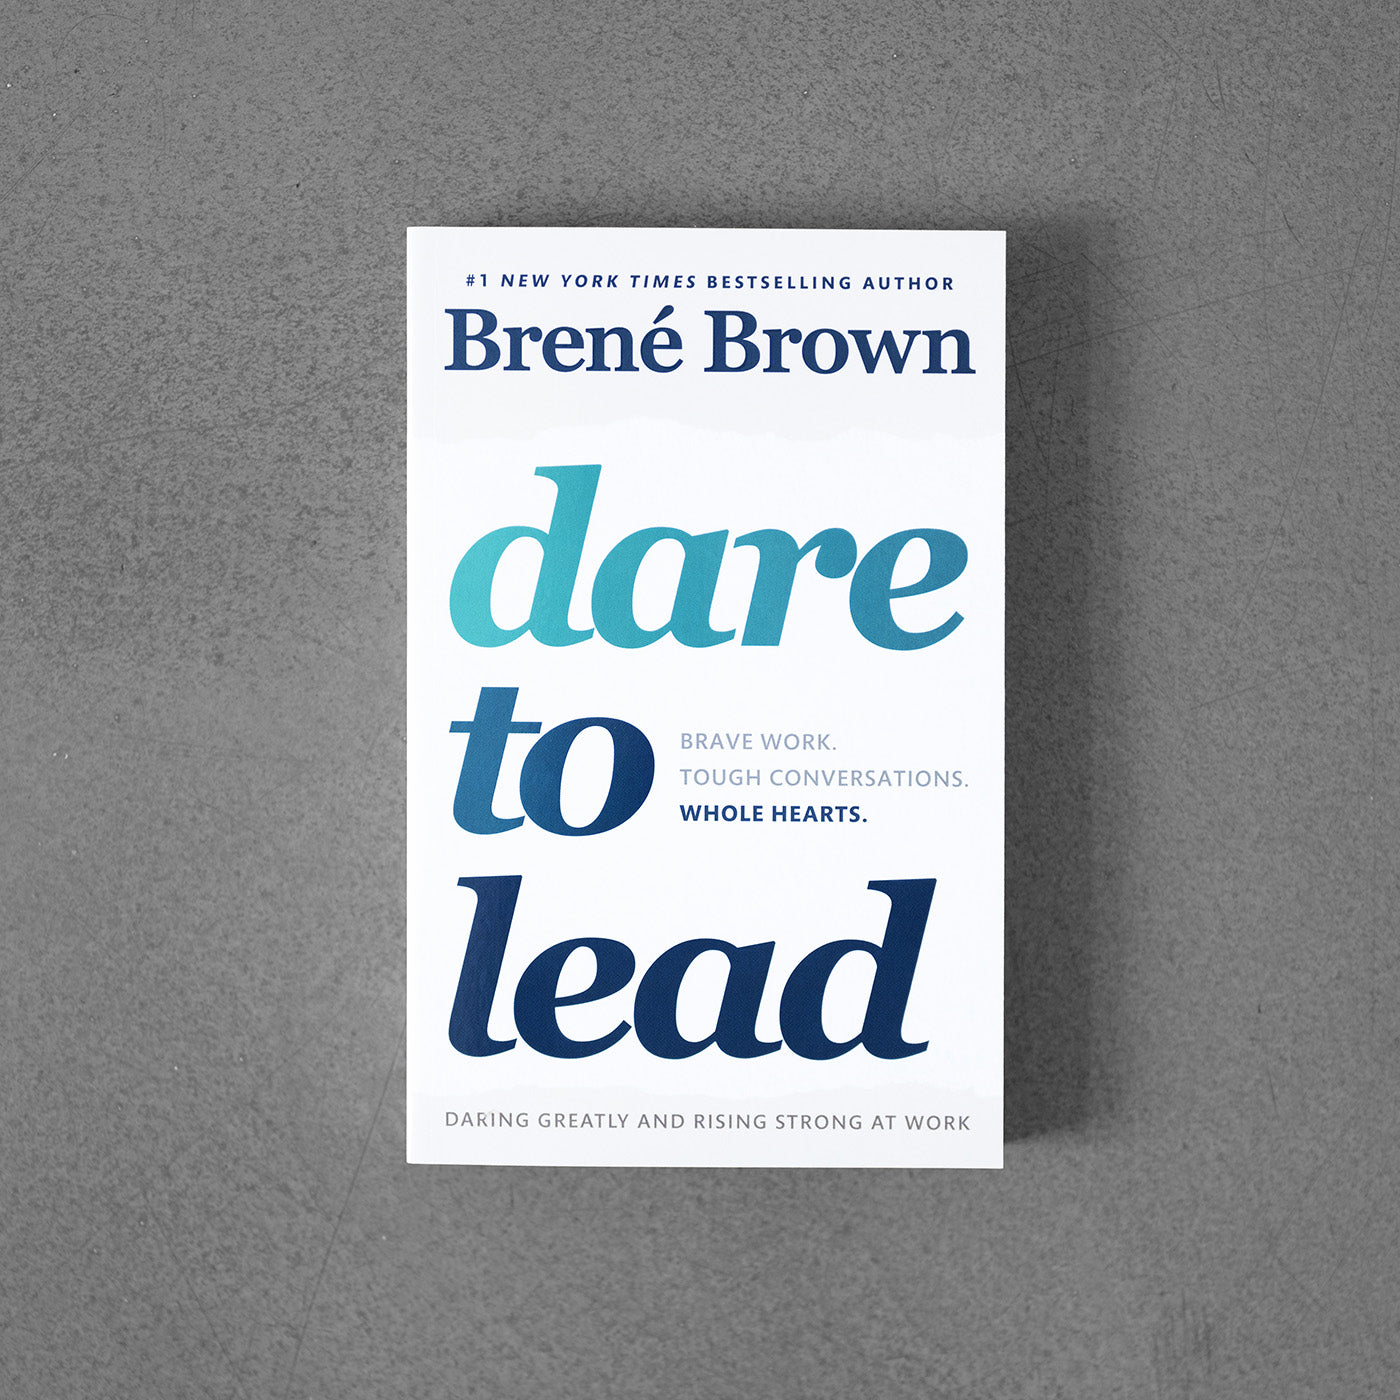 Conversations.　Tough　Hearts　Therapy　Work.　Bro　Lead:　Book　Dare　–　Whole　to　Brave　–Brene